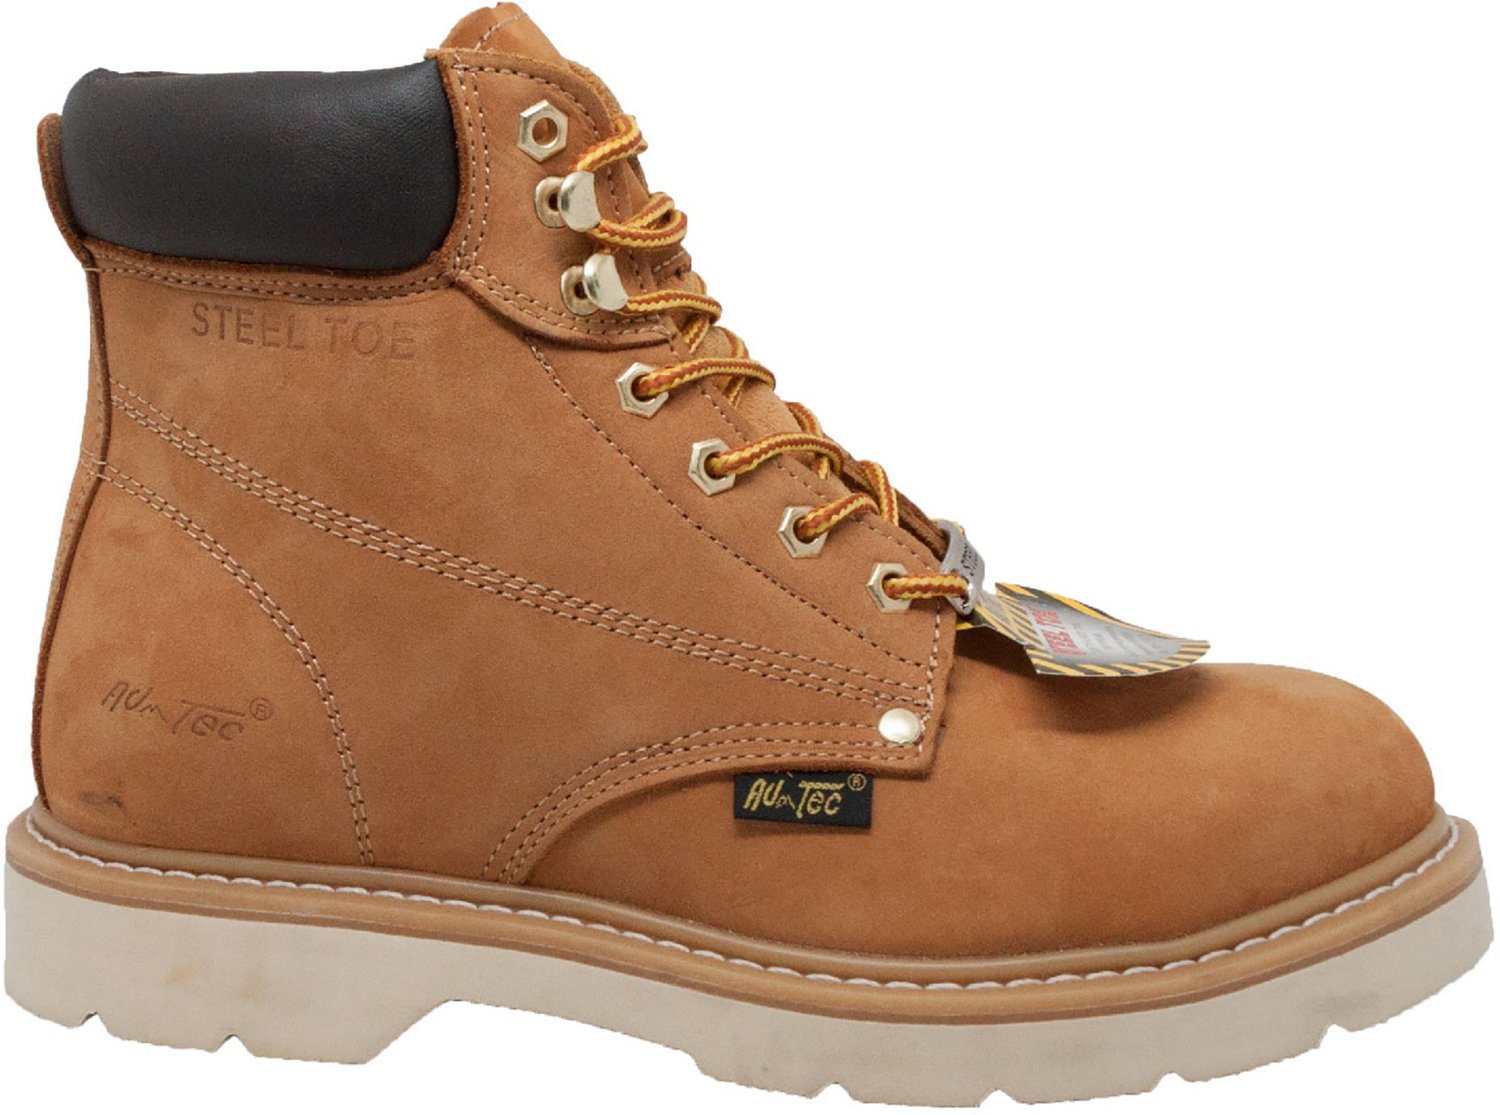 AdTec Men's Steel Toe Work Boots | Free Shipping at Academy